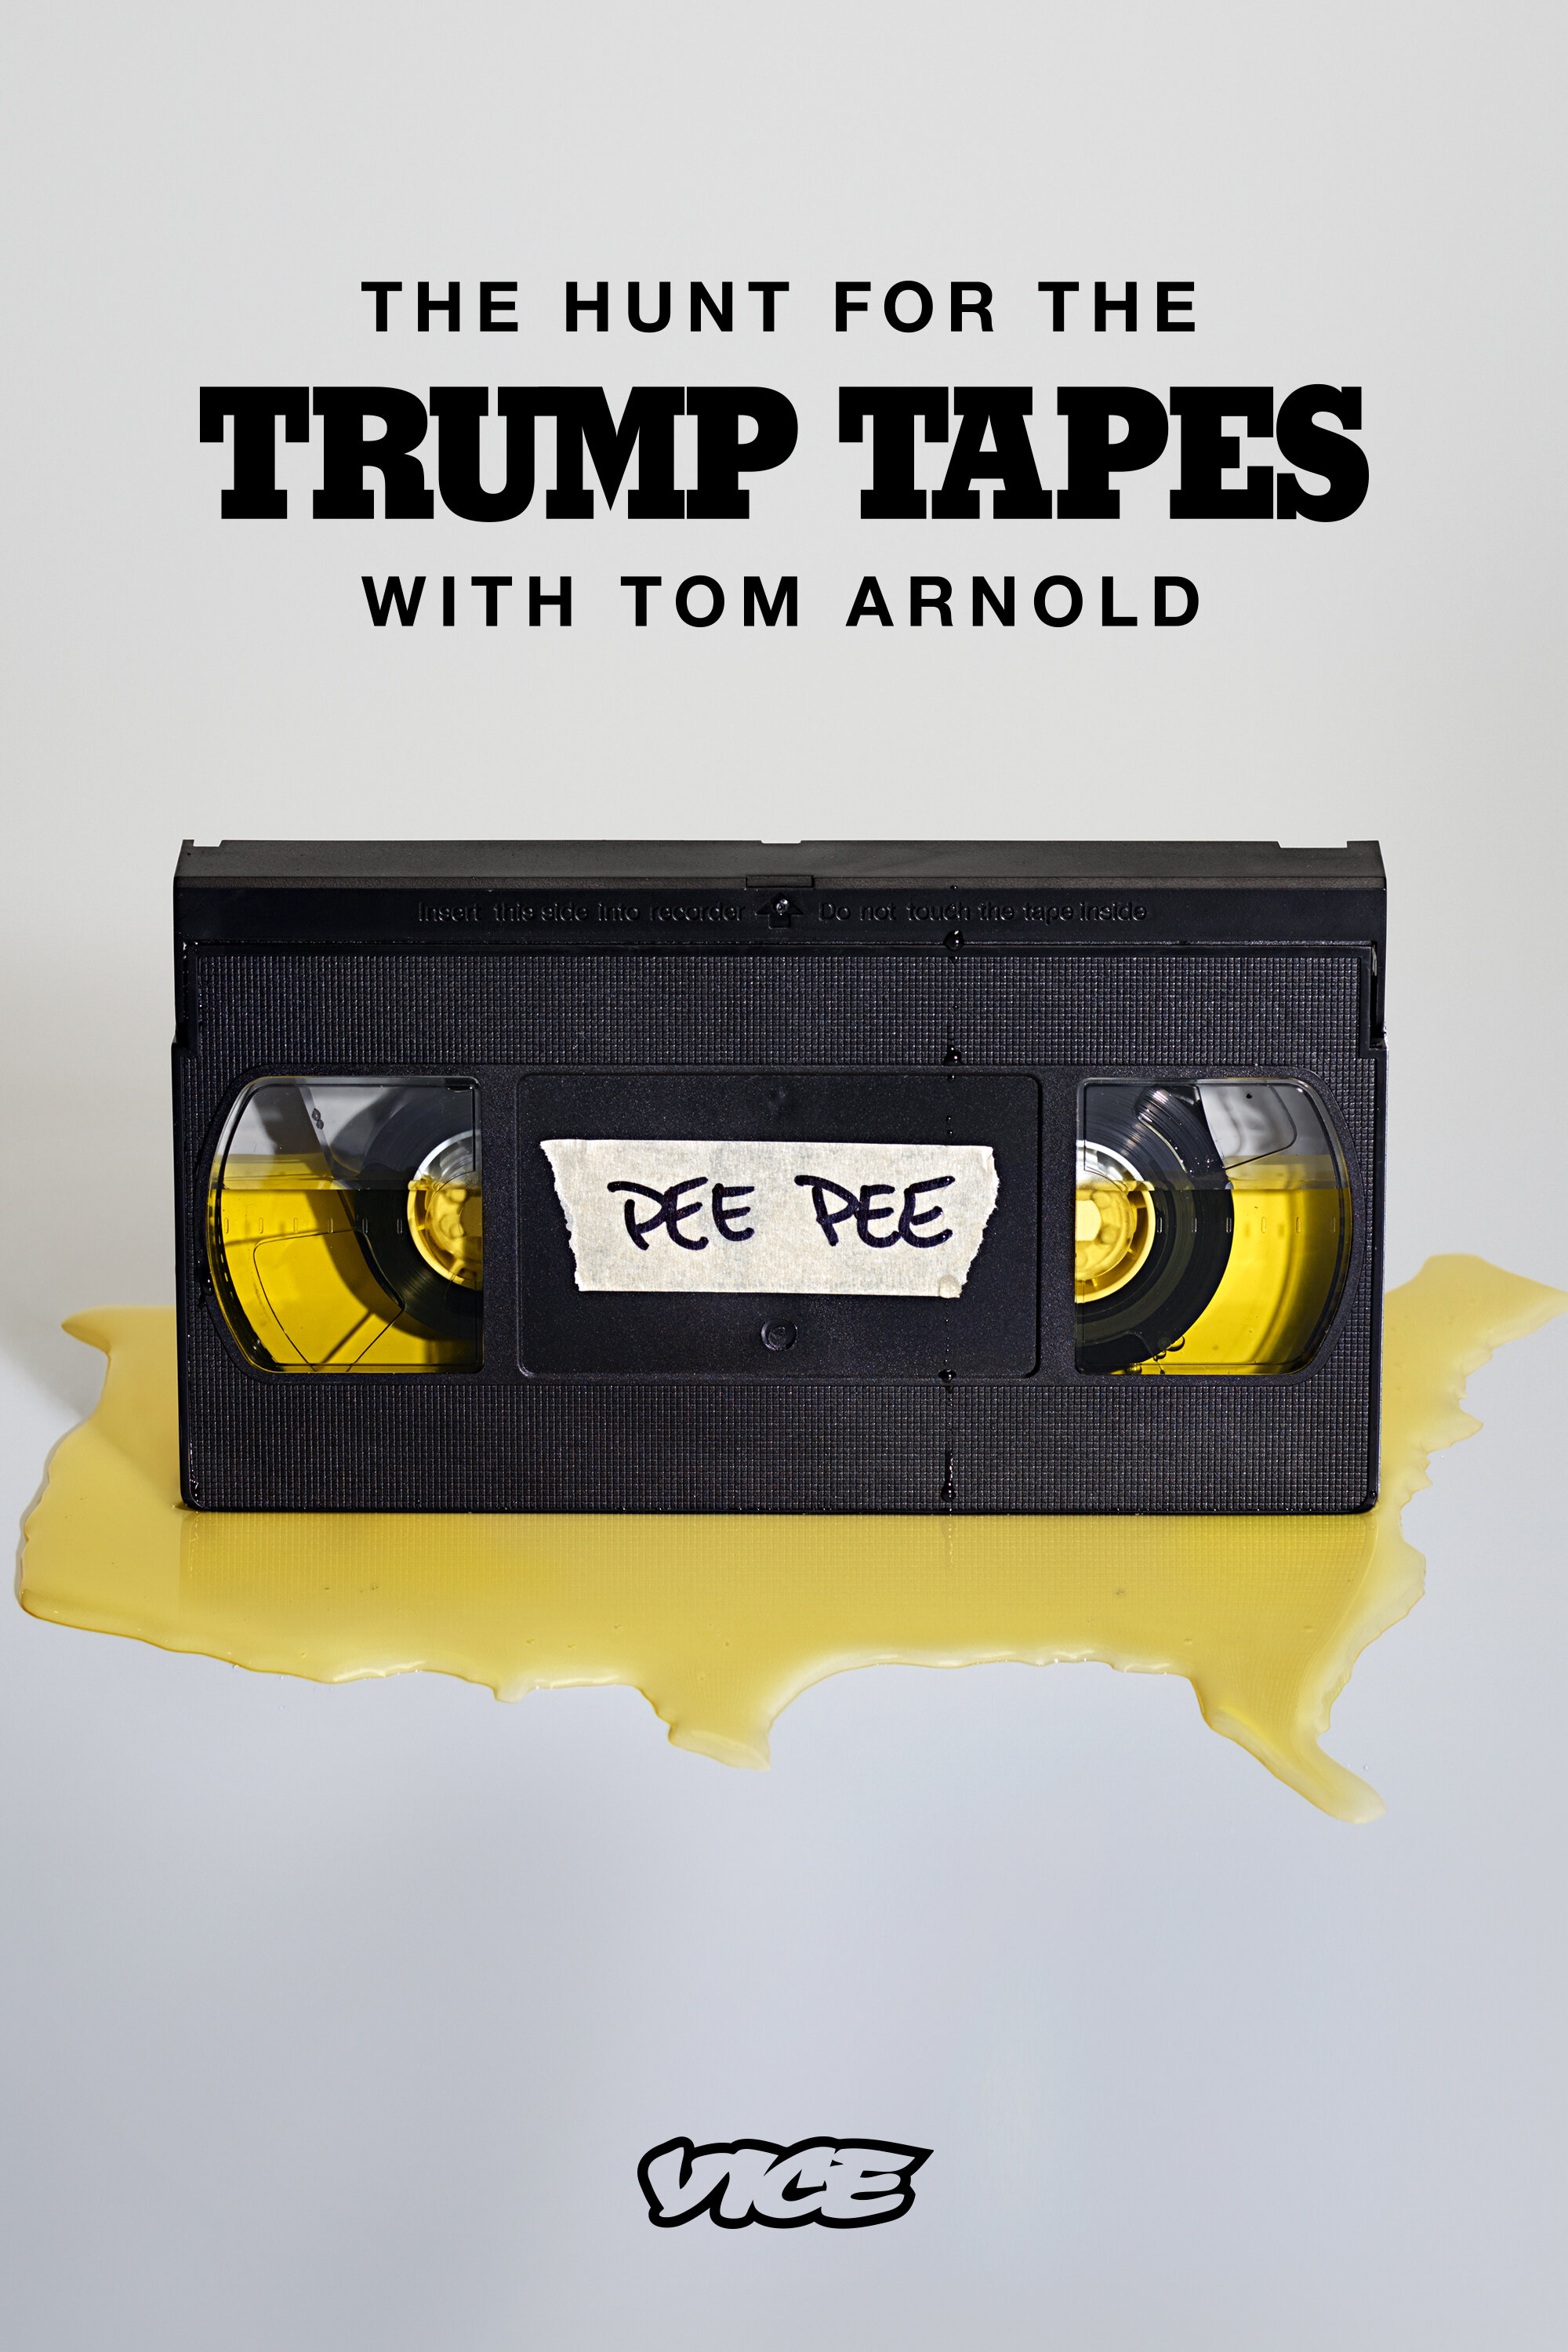 The Hunt for the Trump Tapes with Tom Arnold ne zaman